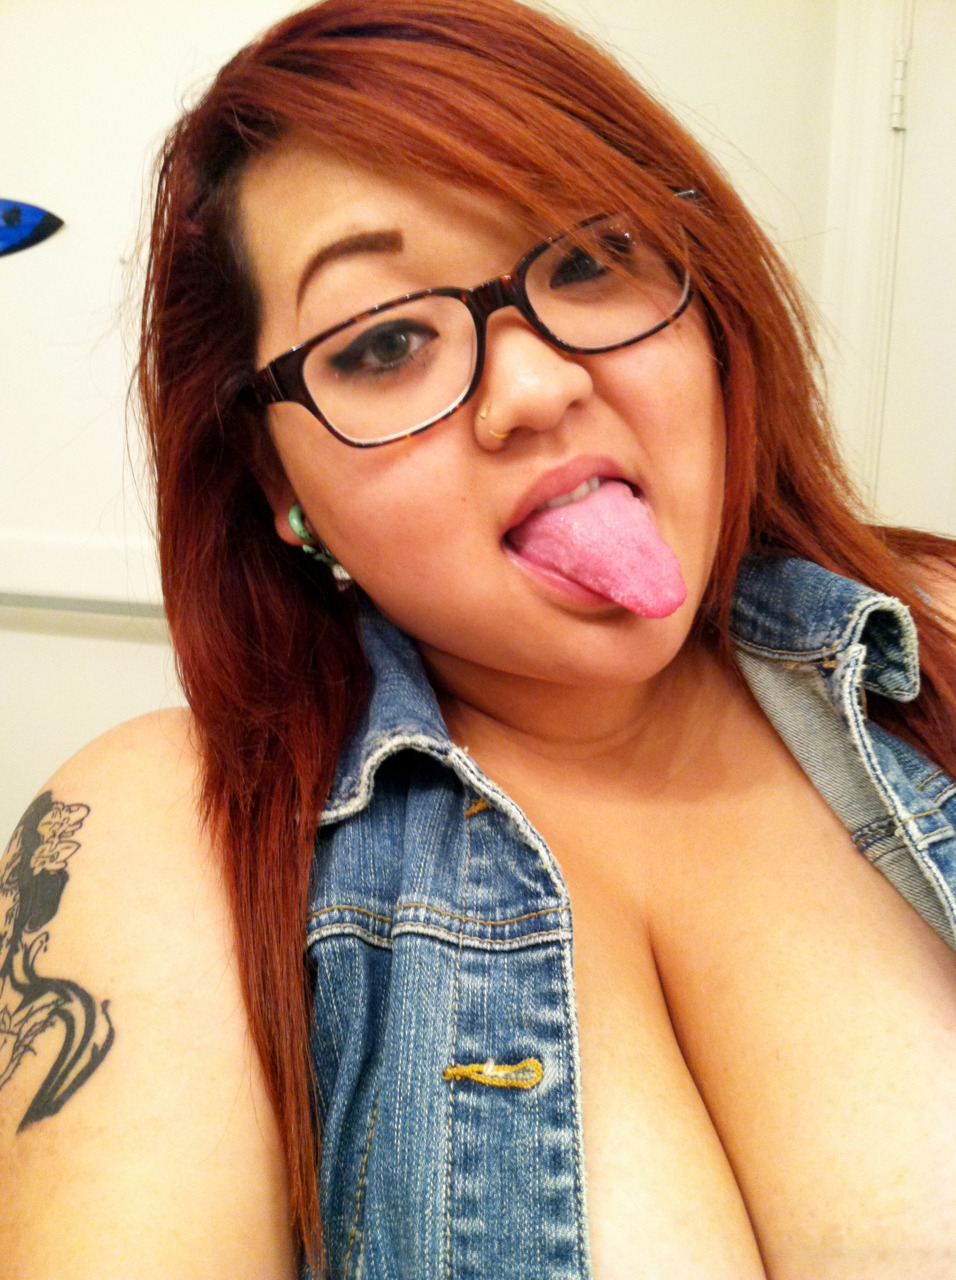 Thisisroy – Ohreinababyy – What A Ginger – Damn Gingers Wit Their Cute Asian Faces Impeccable Curves Mesmerizing Eyes An…3